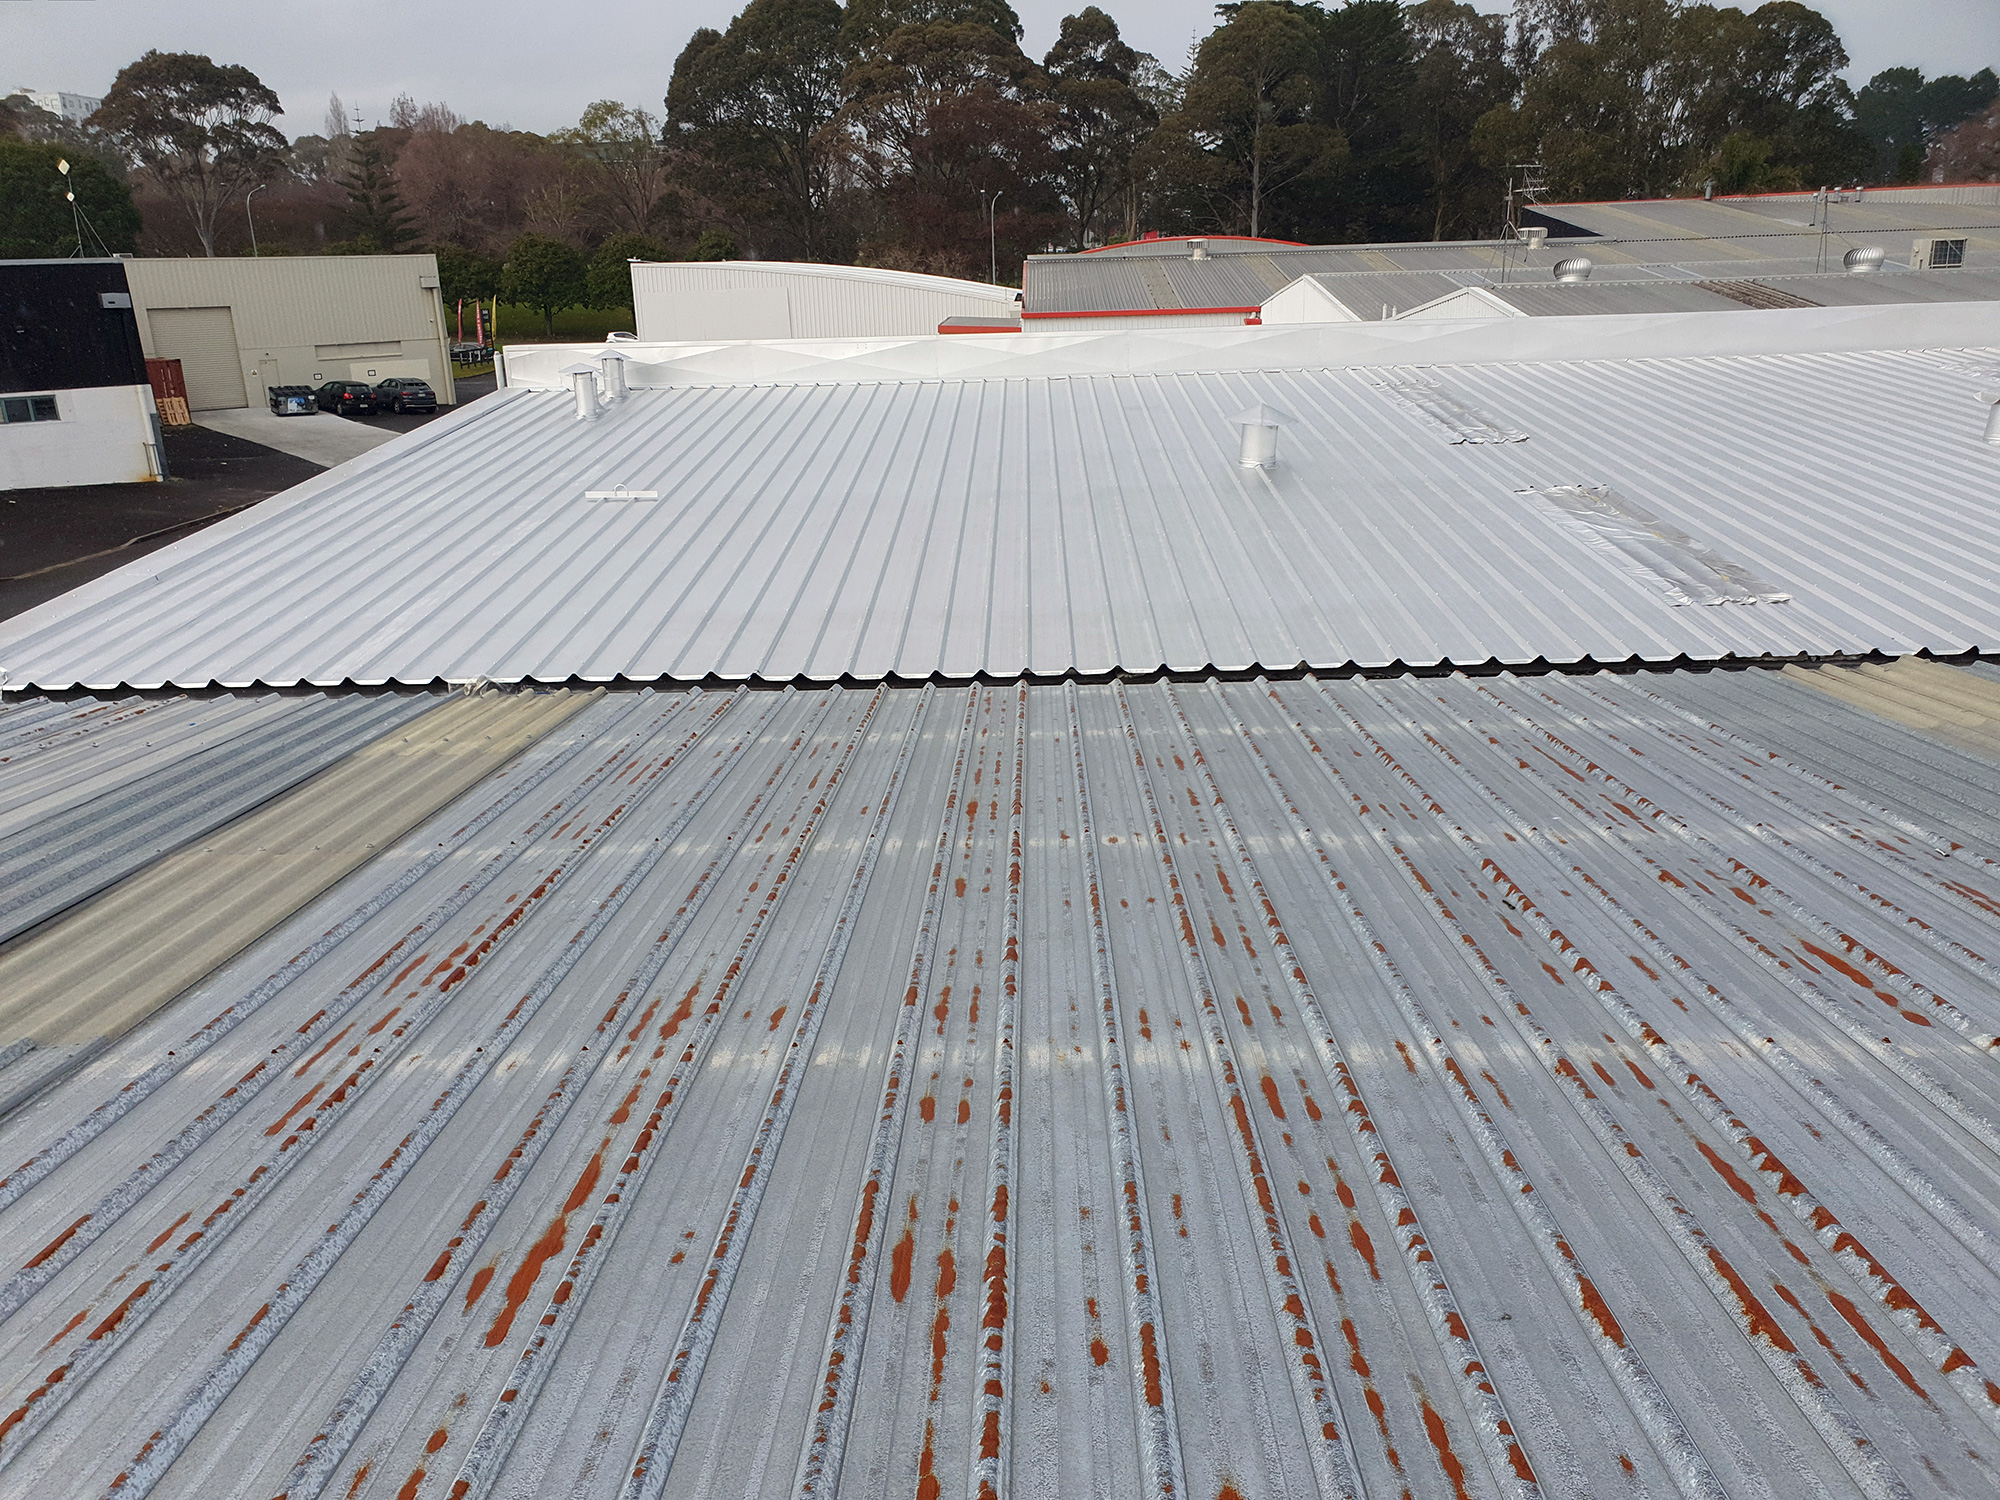 Rusty commercial roof from neighbour - Home